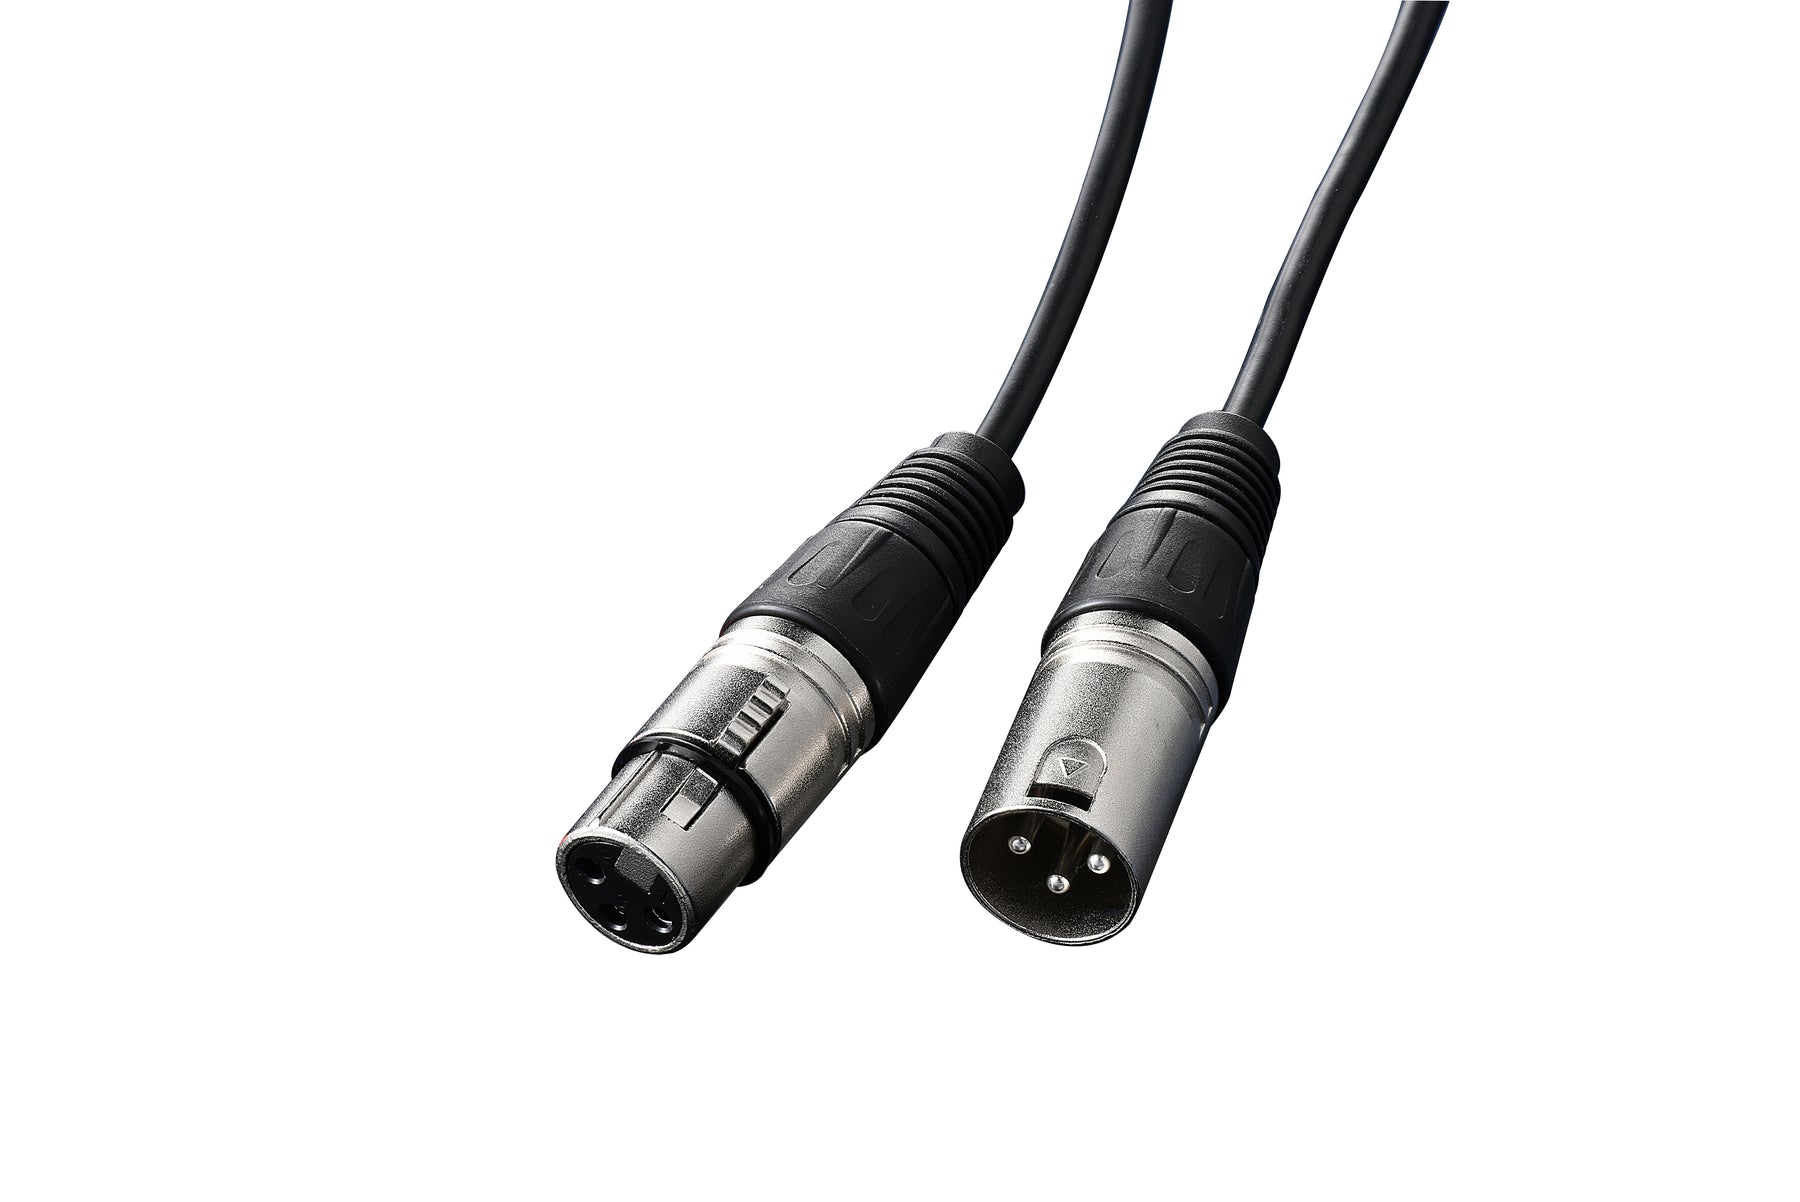 IBRA XLR Mic Cable Premium Quality Pro Microphone Lead | Balanced Male XLR to Female XLR | 1 Metre | Clearer Sound for PA Systems, Studio Recording, Mixers, Amplification & Speakers - BLACK